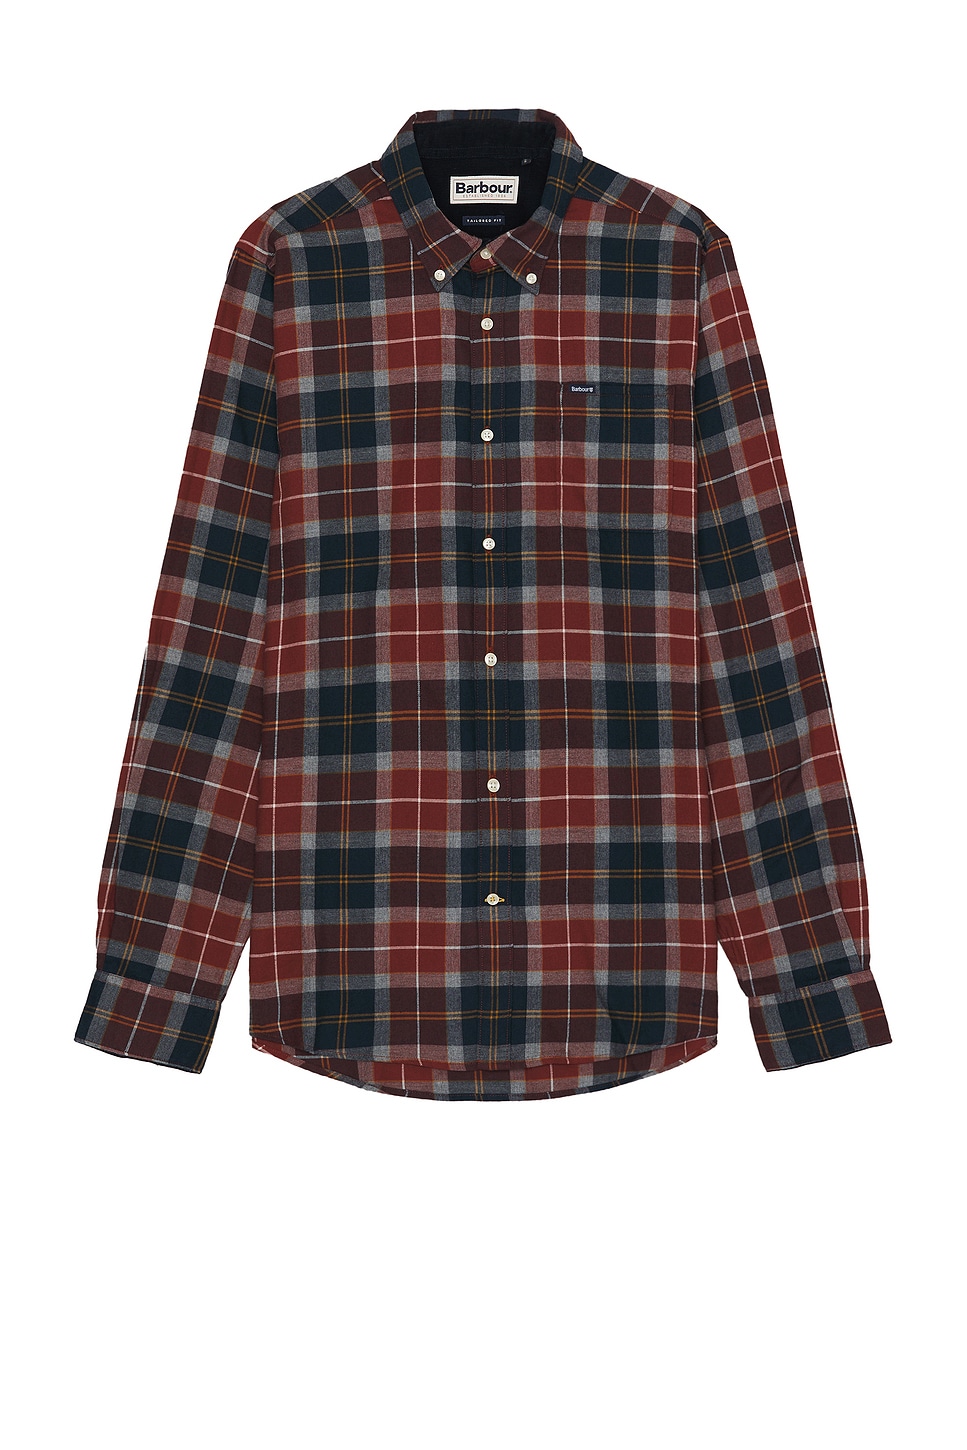 Image 1 of Barbour Rasay Tailored Fit Shirt in Tartan